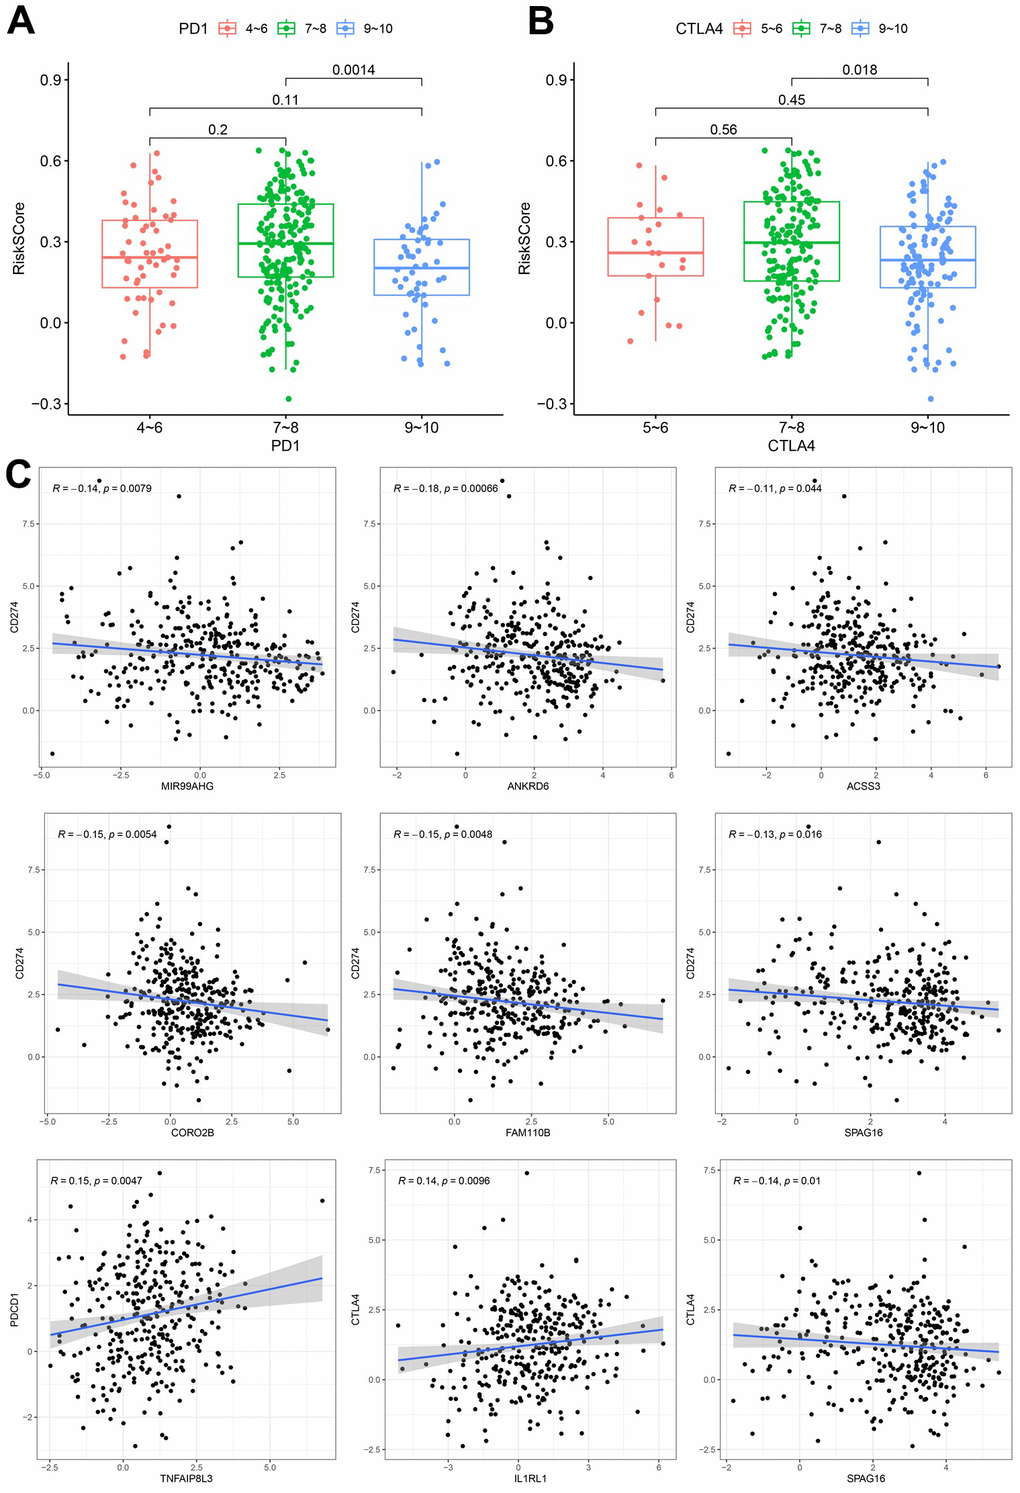 Correlation between the constructed model and ICI. (A) Analysis of risk scores among different IPS-PD1/PDL1/PDL2 groups. (B) Comparation of risk scores in the indicated IPS-CTLA4 groups. (C) Expression correlation between hub nodes and immune checkpoint.